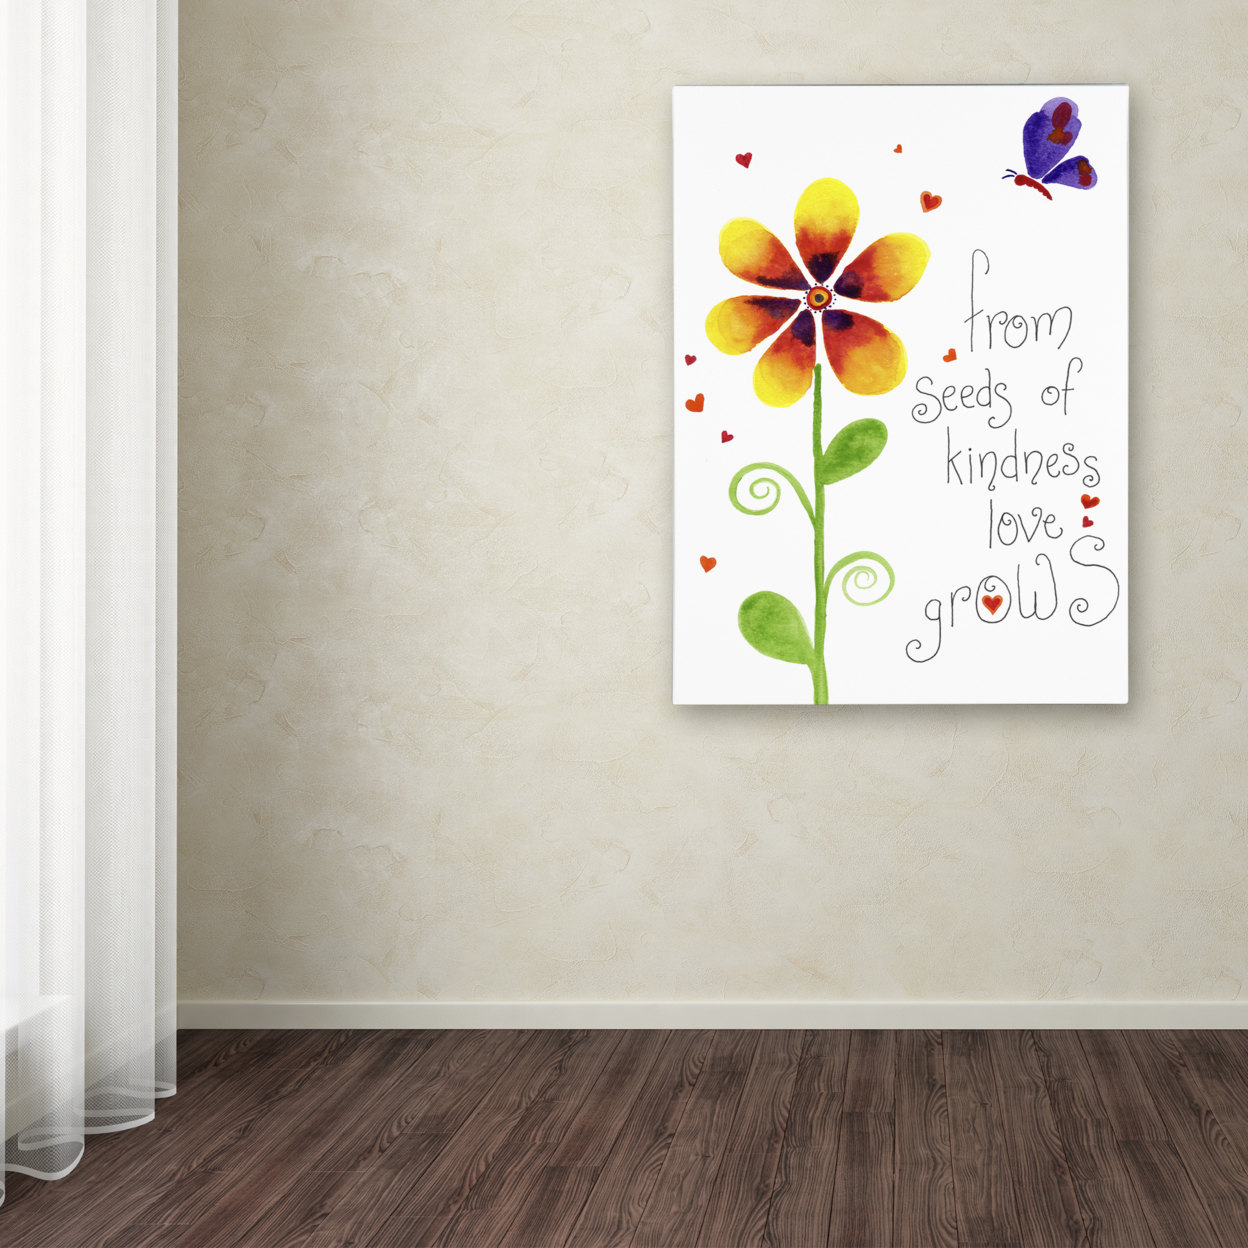 Jennifer Nilsson 'Seeds Of Kindness' Canvas Wall Art 35 X 47 Inches